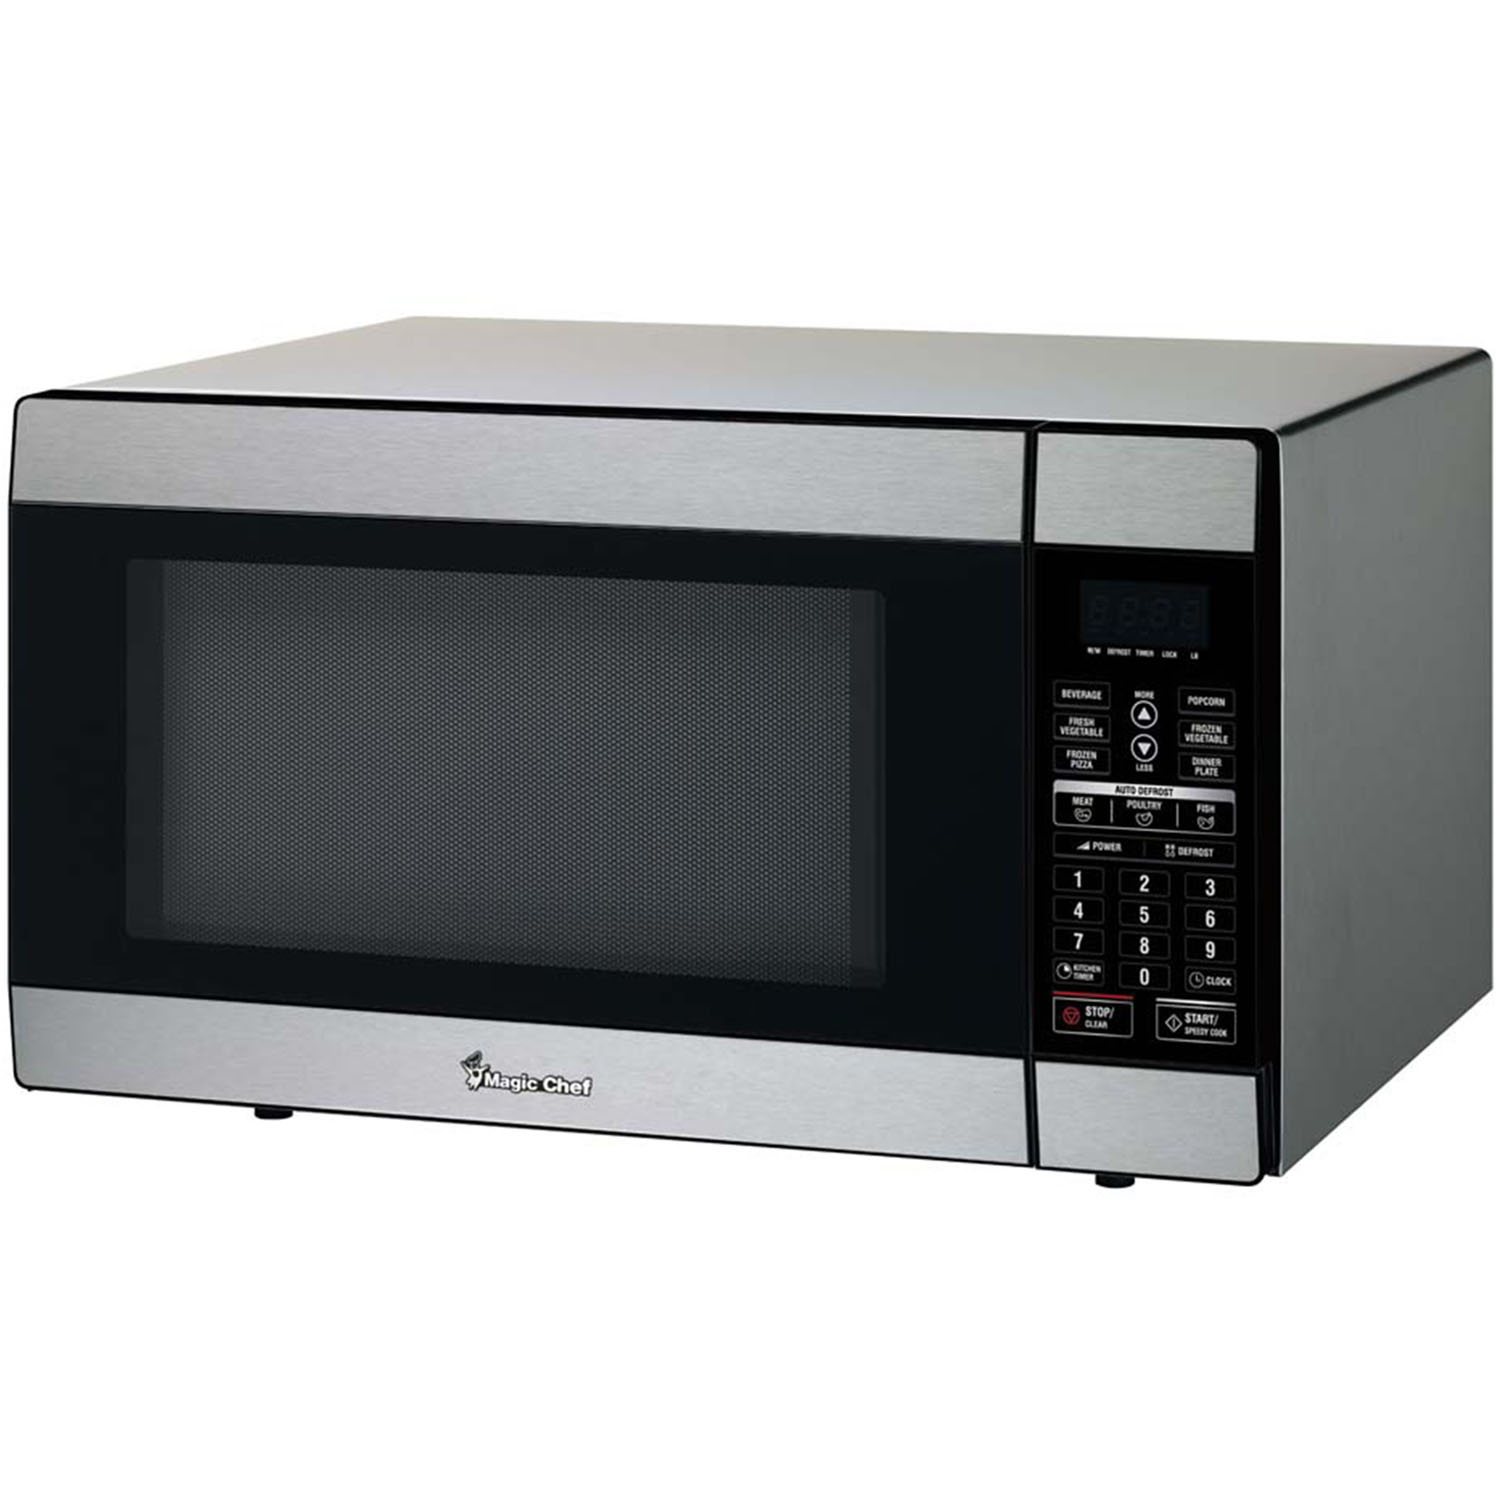 Magic Chef 1.8 Cu. Ft. 1100W Countertop Microwave Oven in Stainless Steel - image 3 of 3